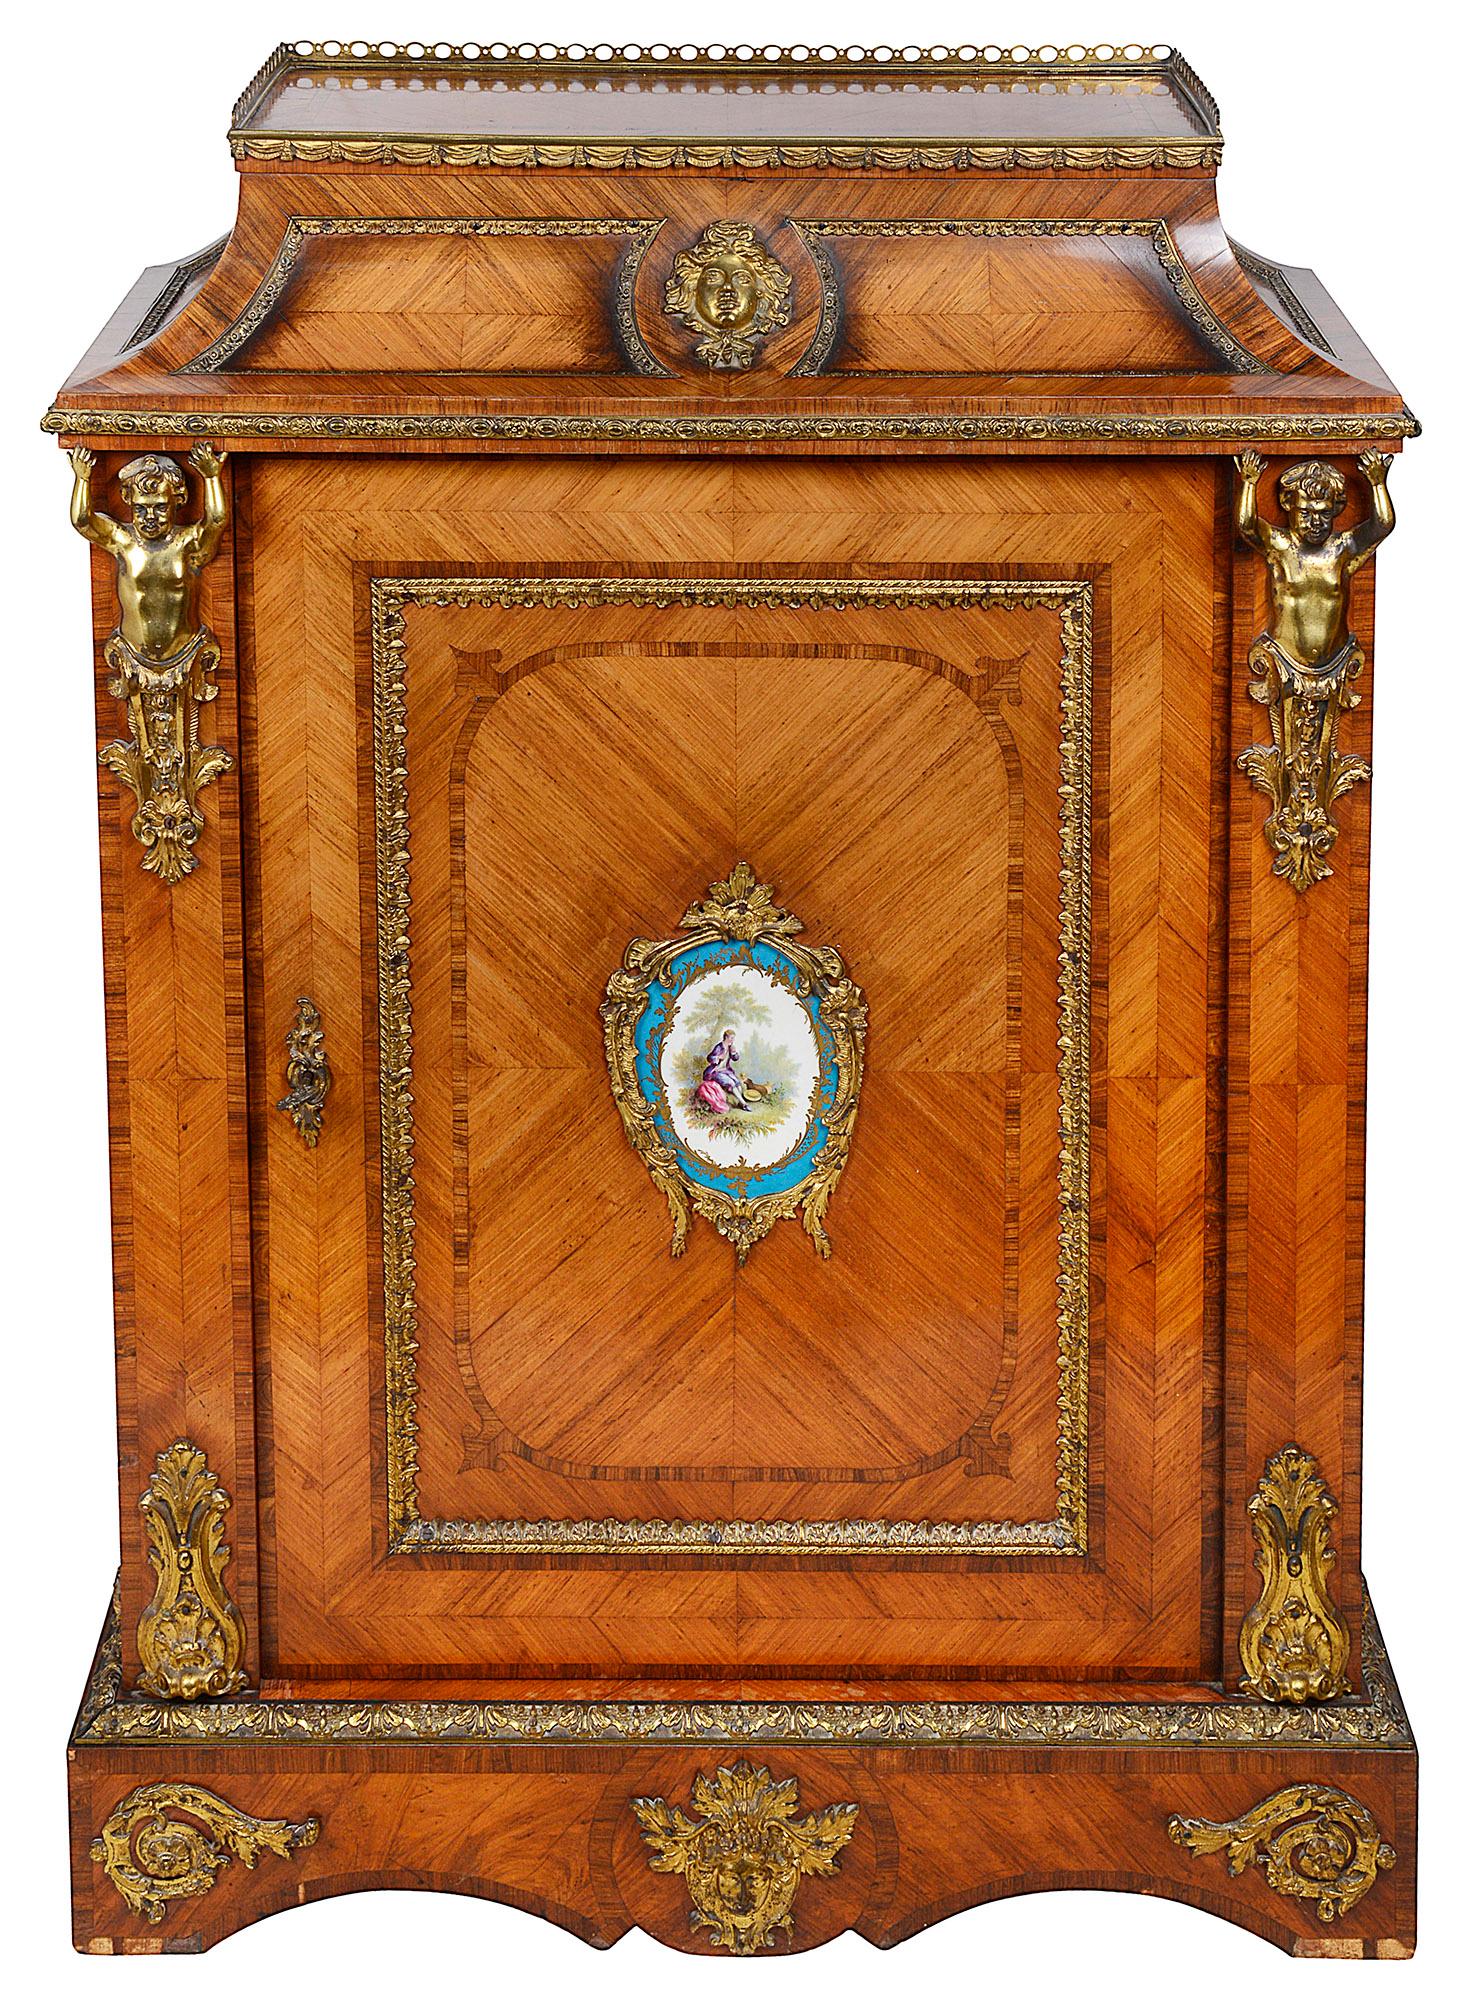 A very good quality pair of 19th century French ormolu and porcelain mounted pier cabinets, each with cross-banded decoration, monopodia supports, the Sevres style porcelain plaques depicting romantic scenes, mounted on doors that open to reveal a